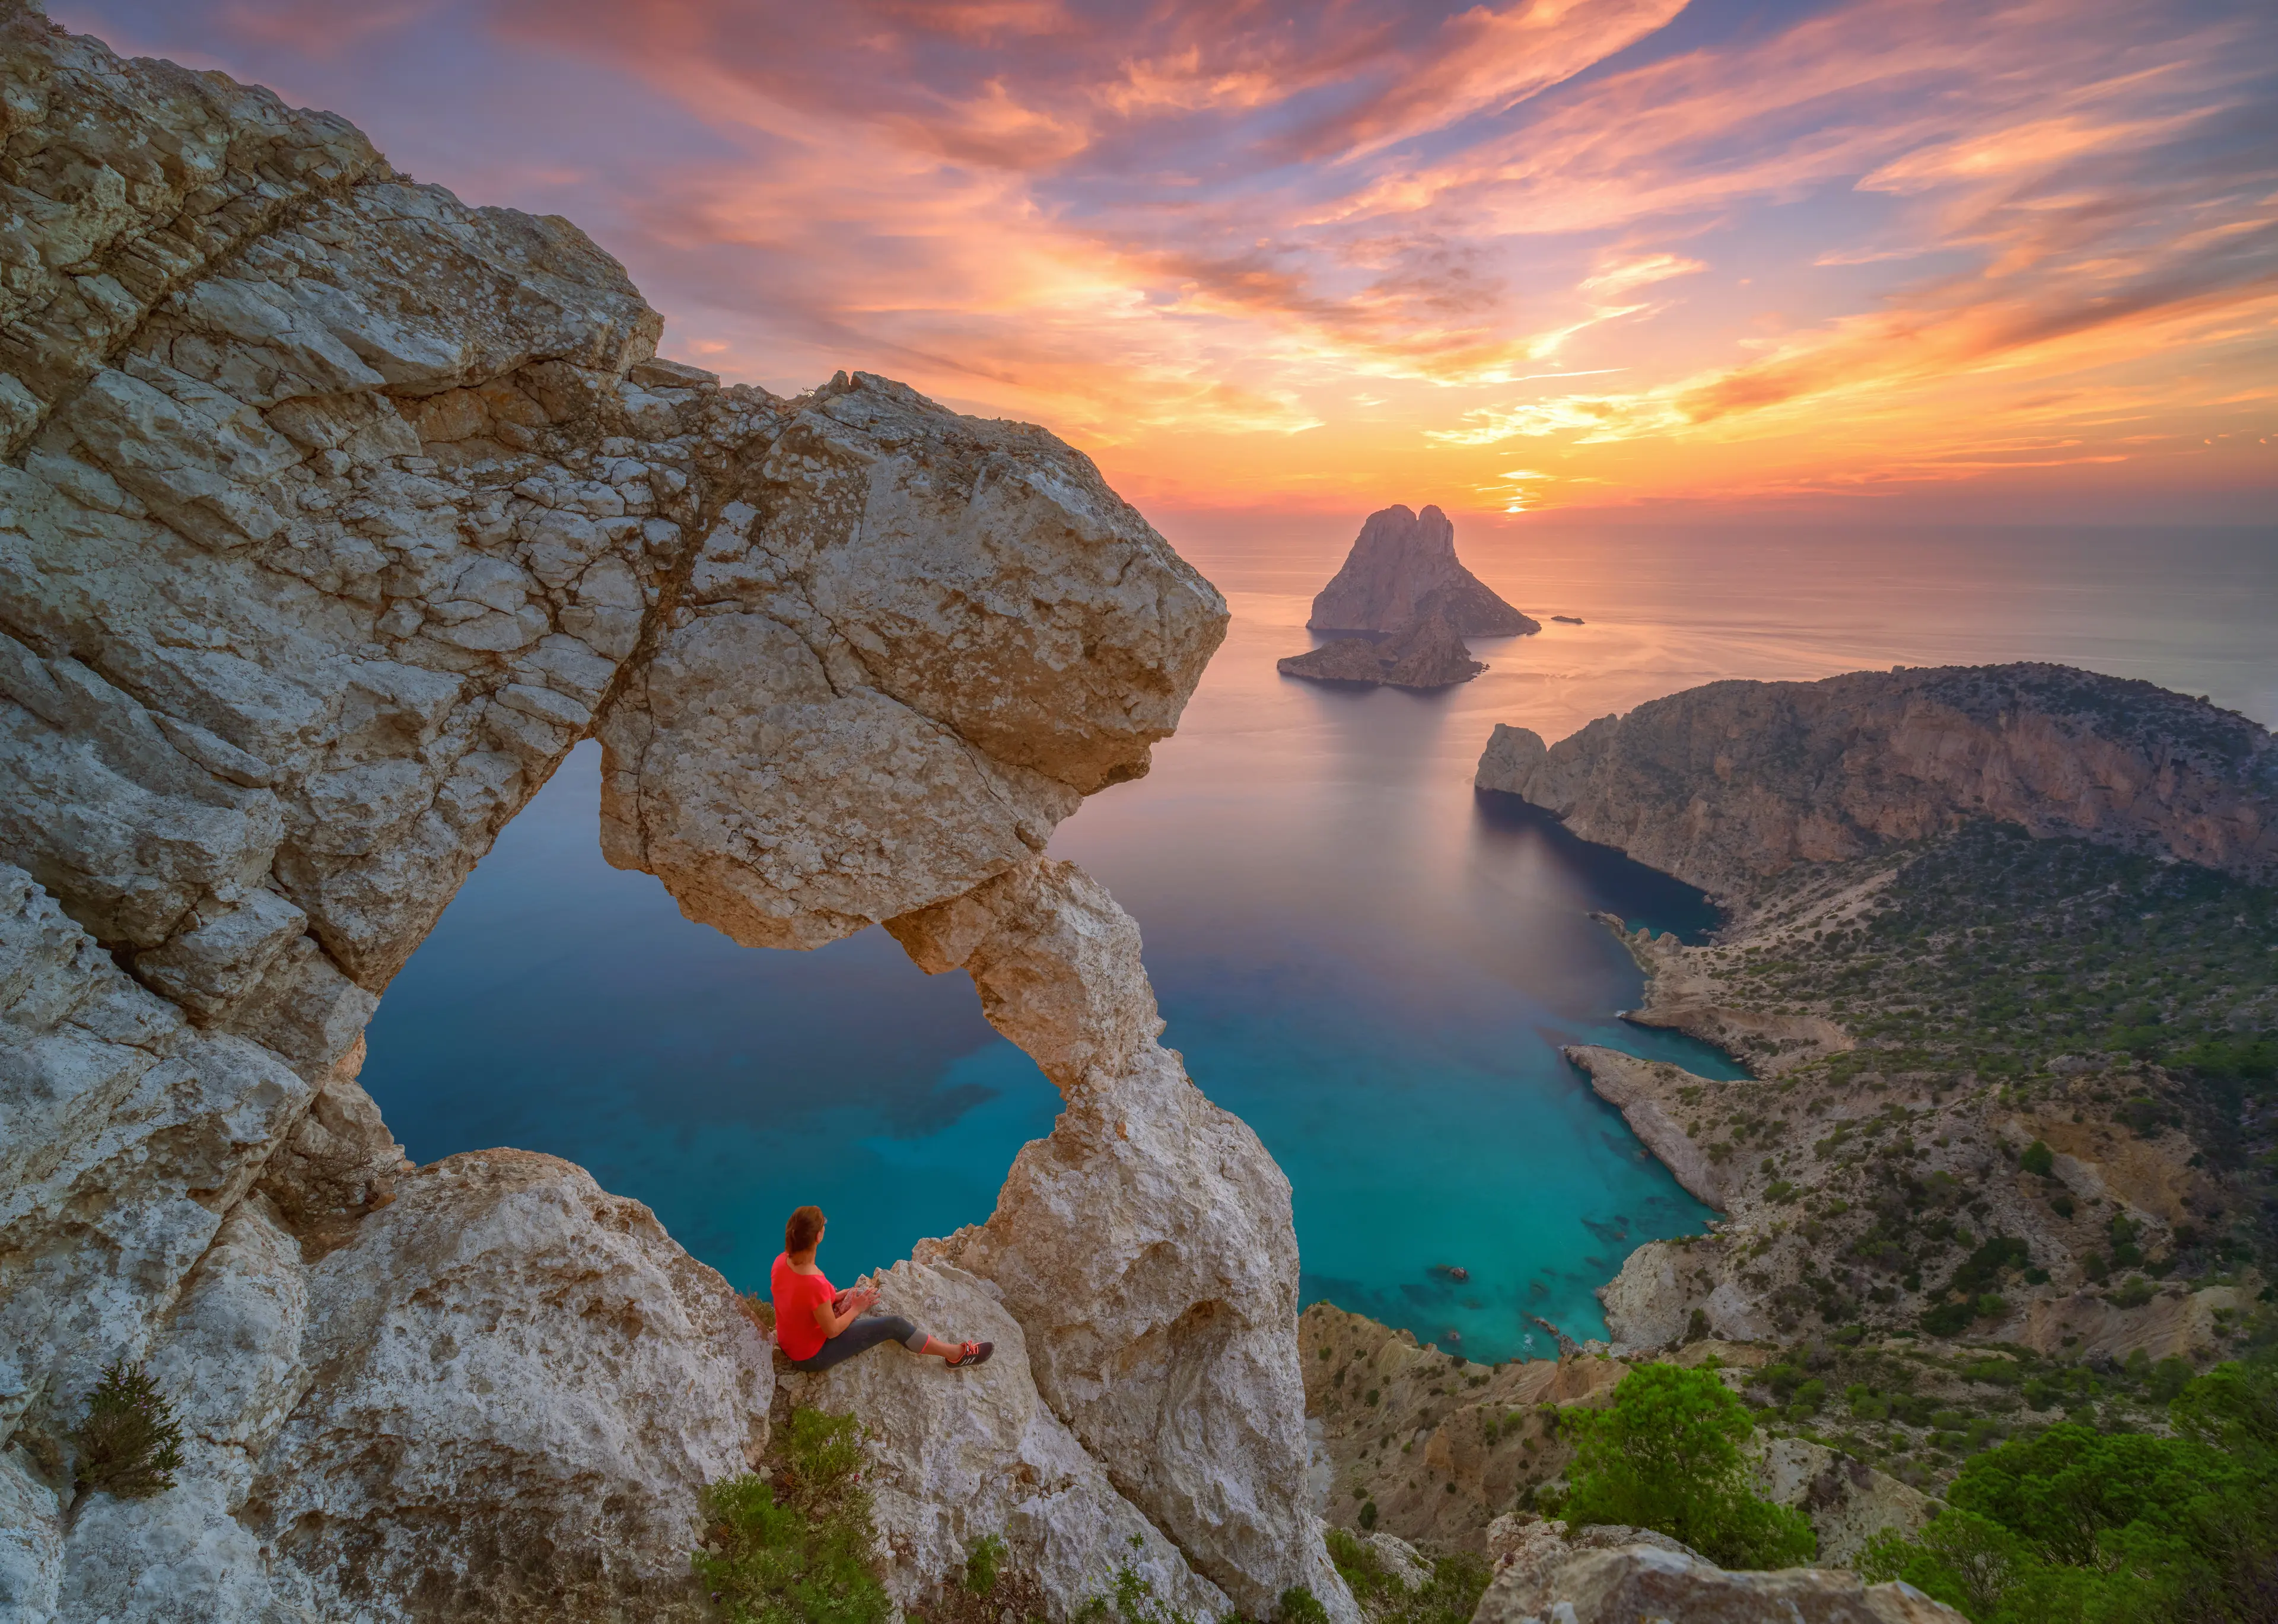 1-Day Solo Adventure and Sightseeing in Ibiza for Locals